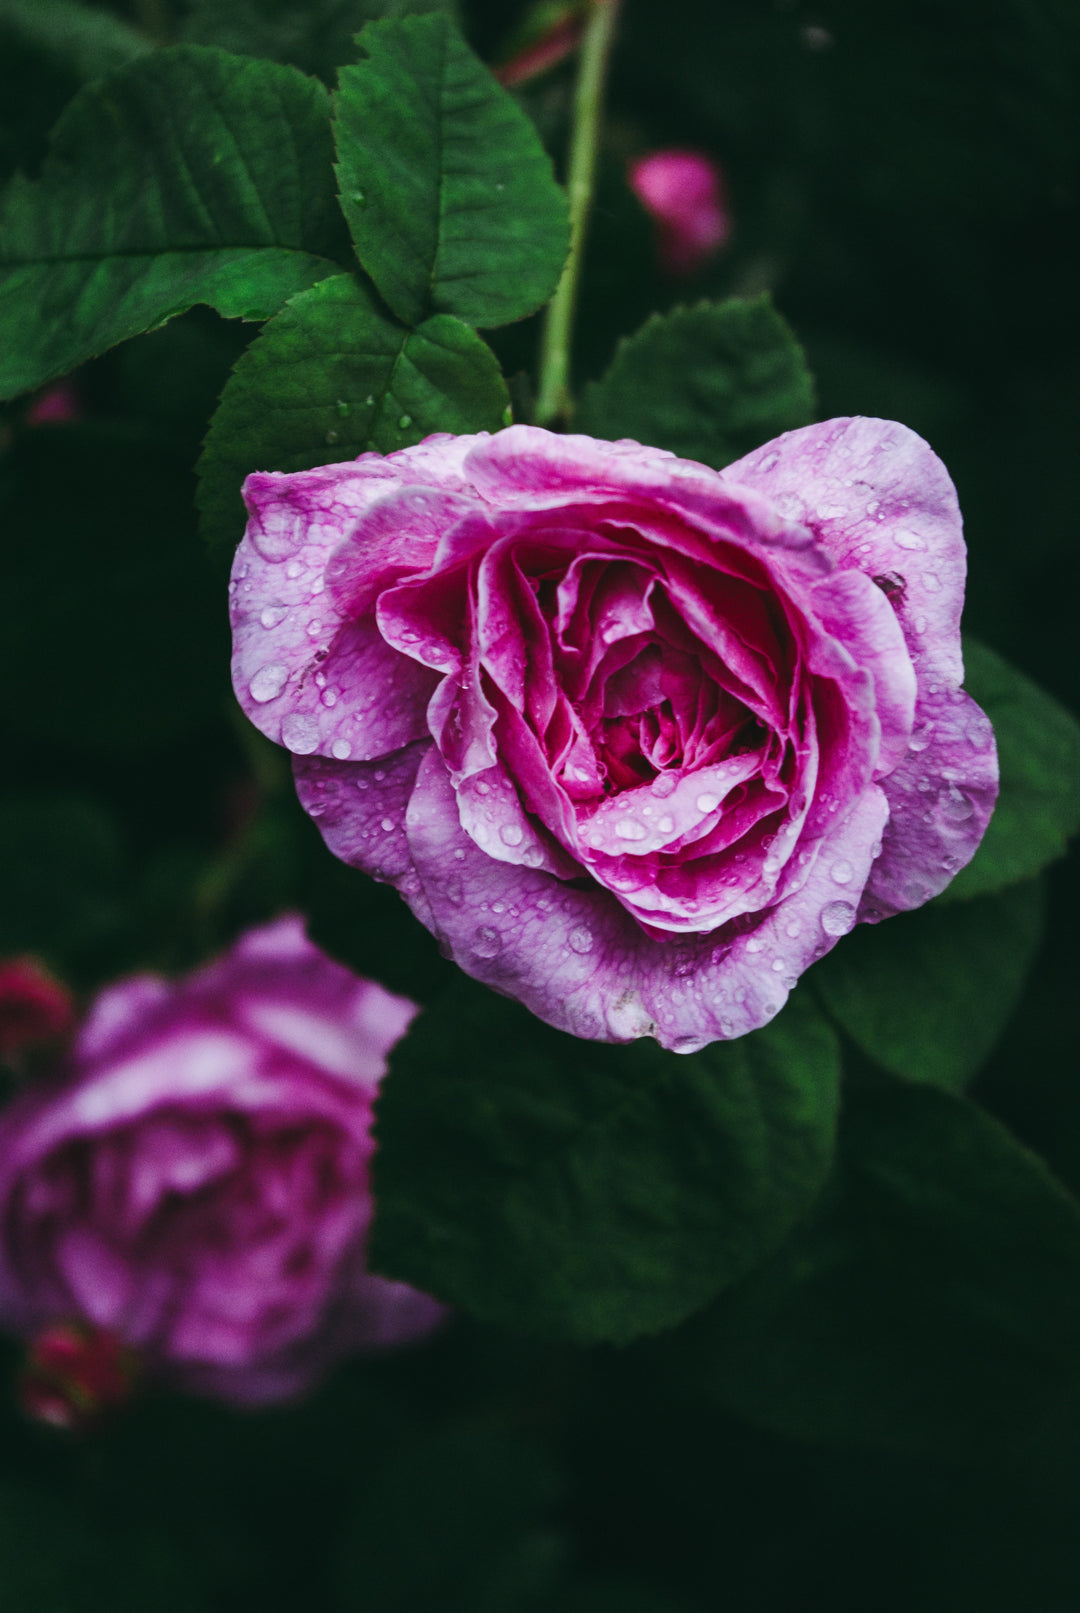 A purple rose. A rose can be an important ingredient when casting a love spell.